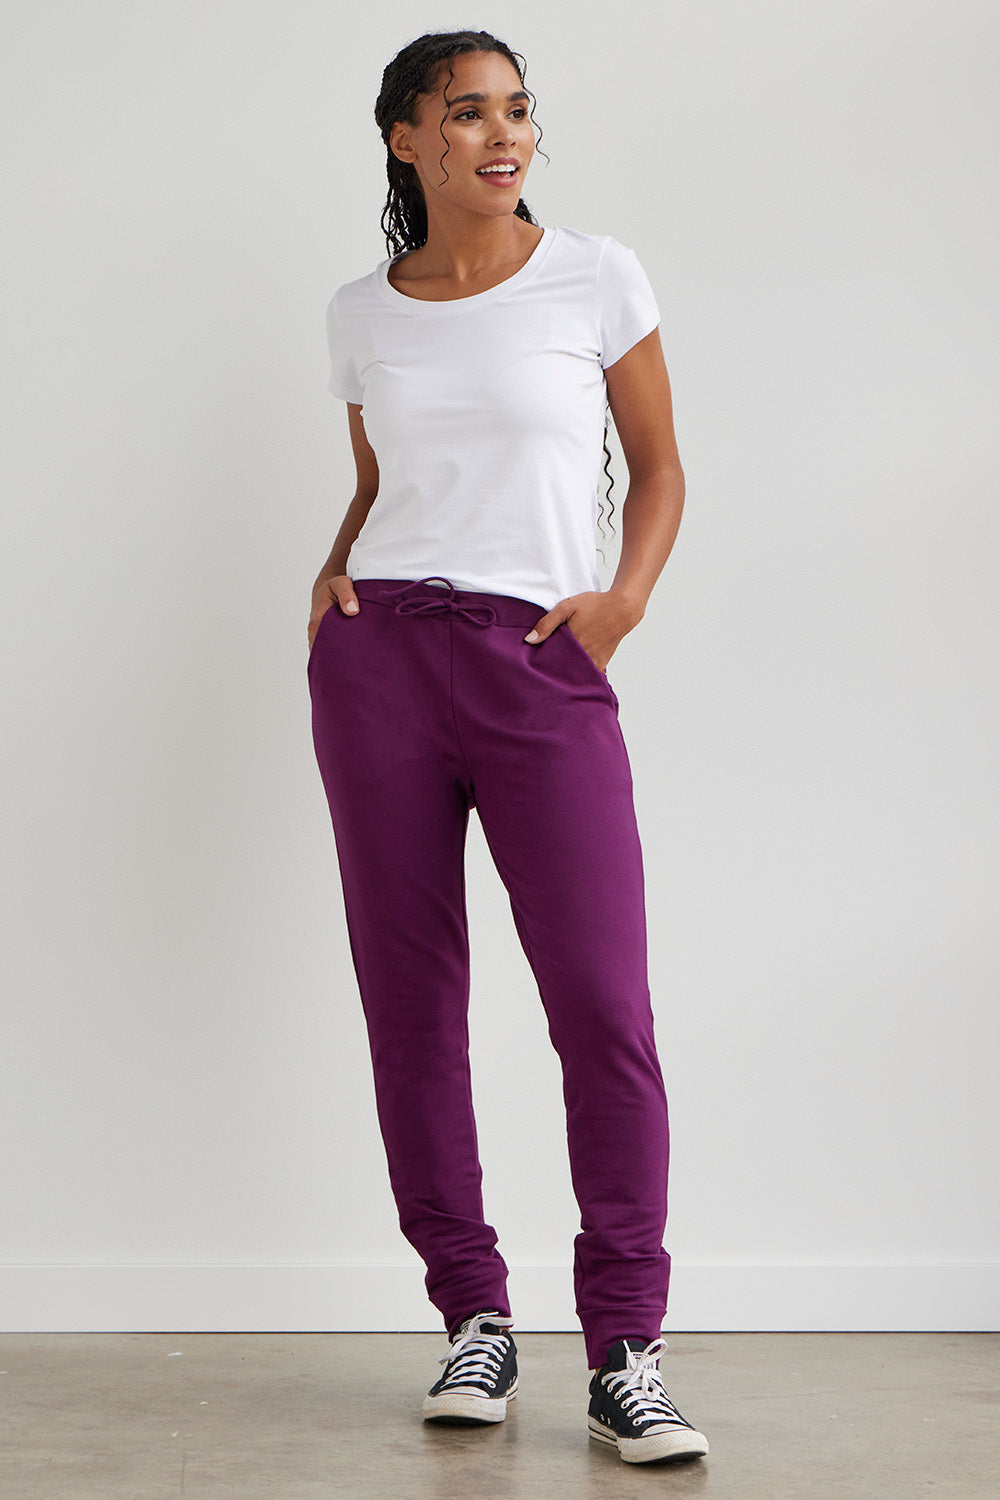 12 Pieces Ladies Single Jersey Cotton Jogger Pants With Pockets In